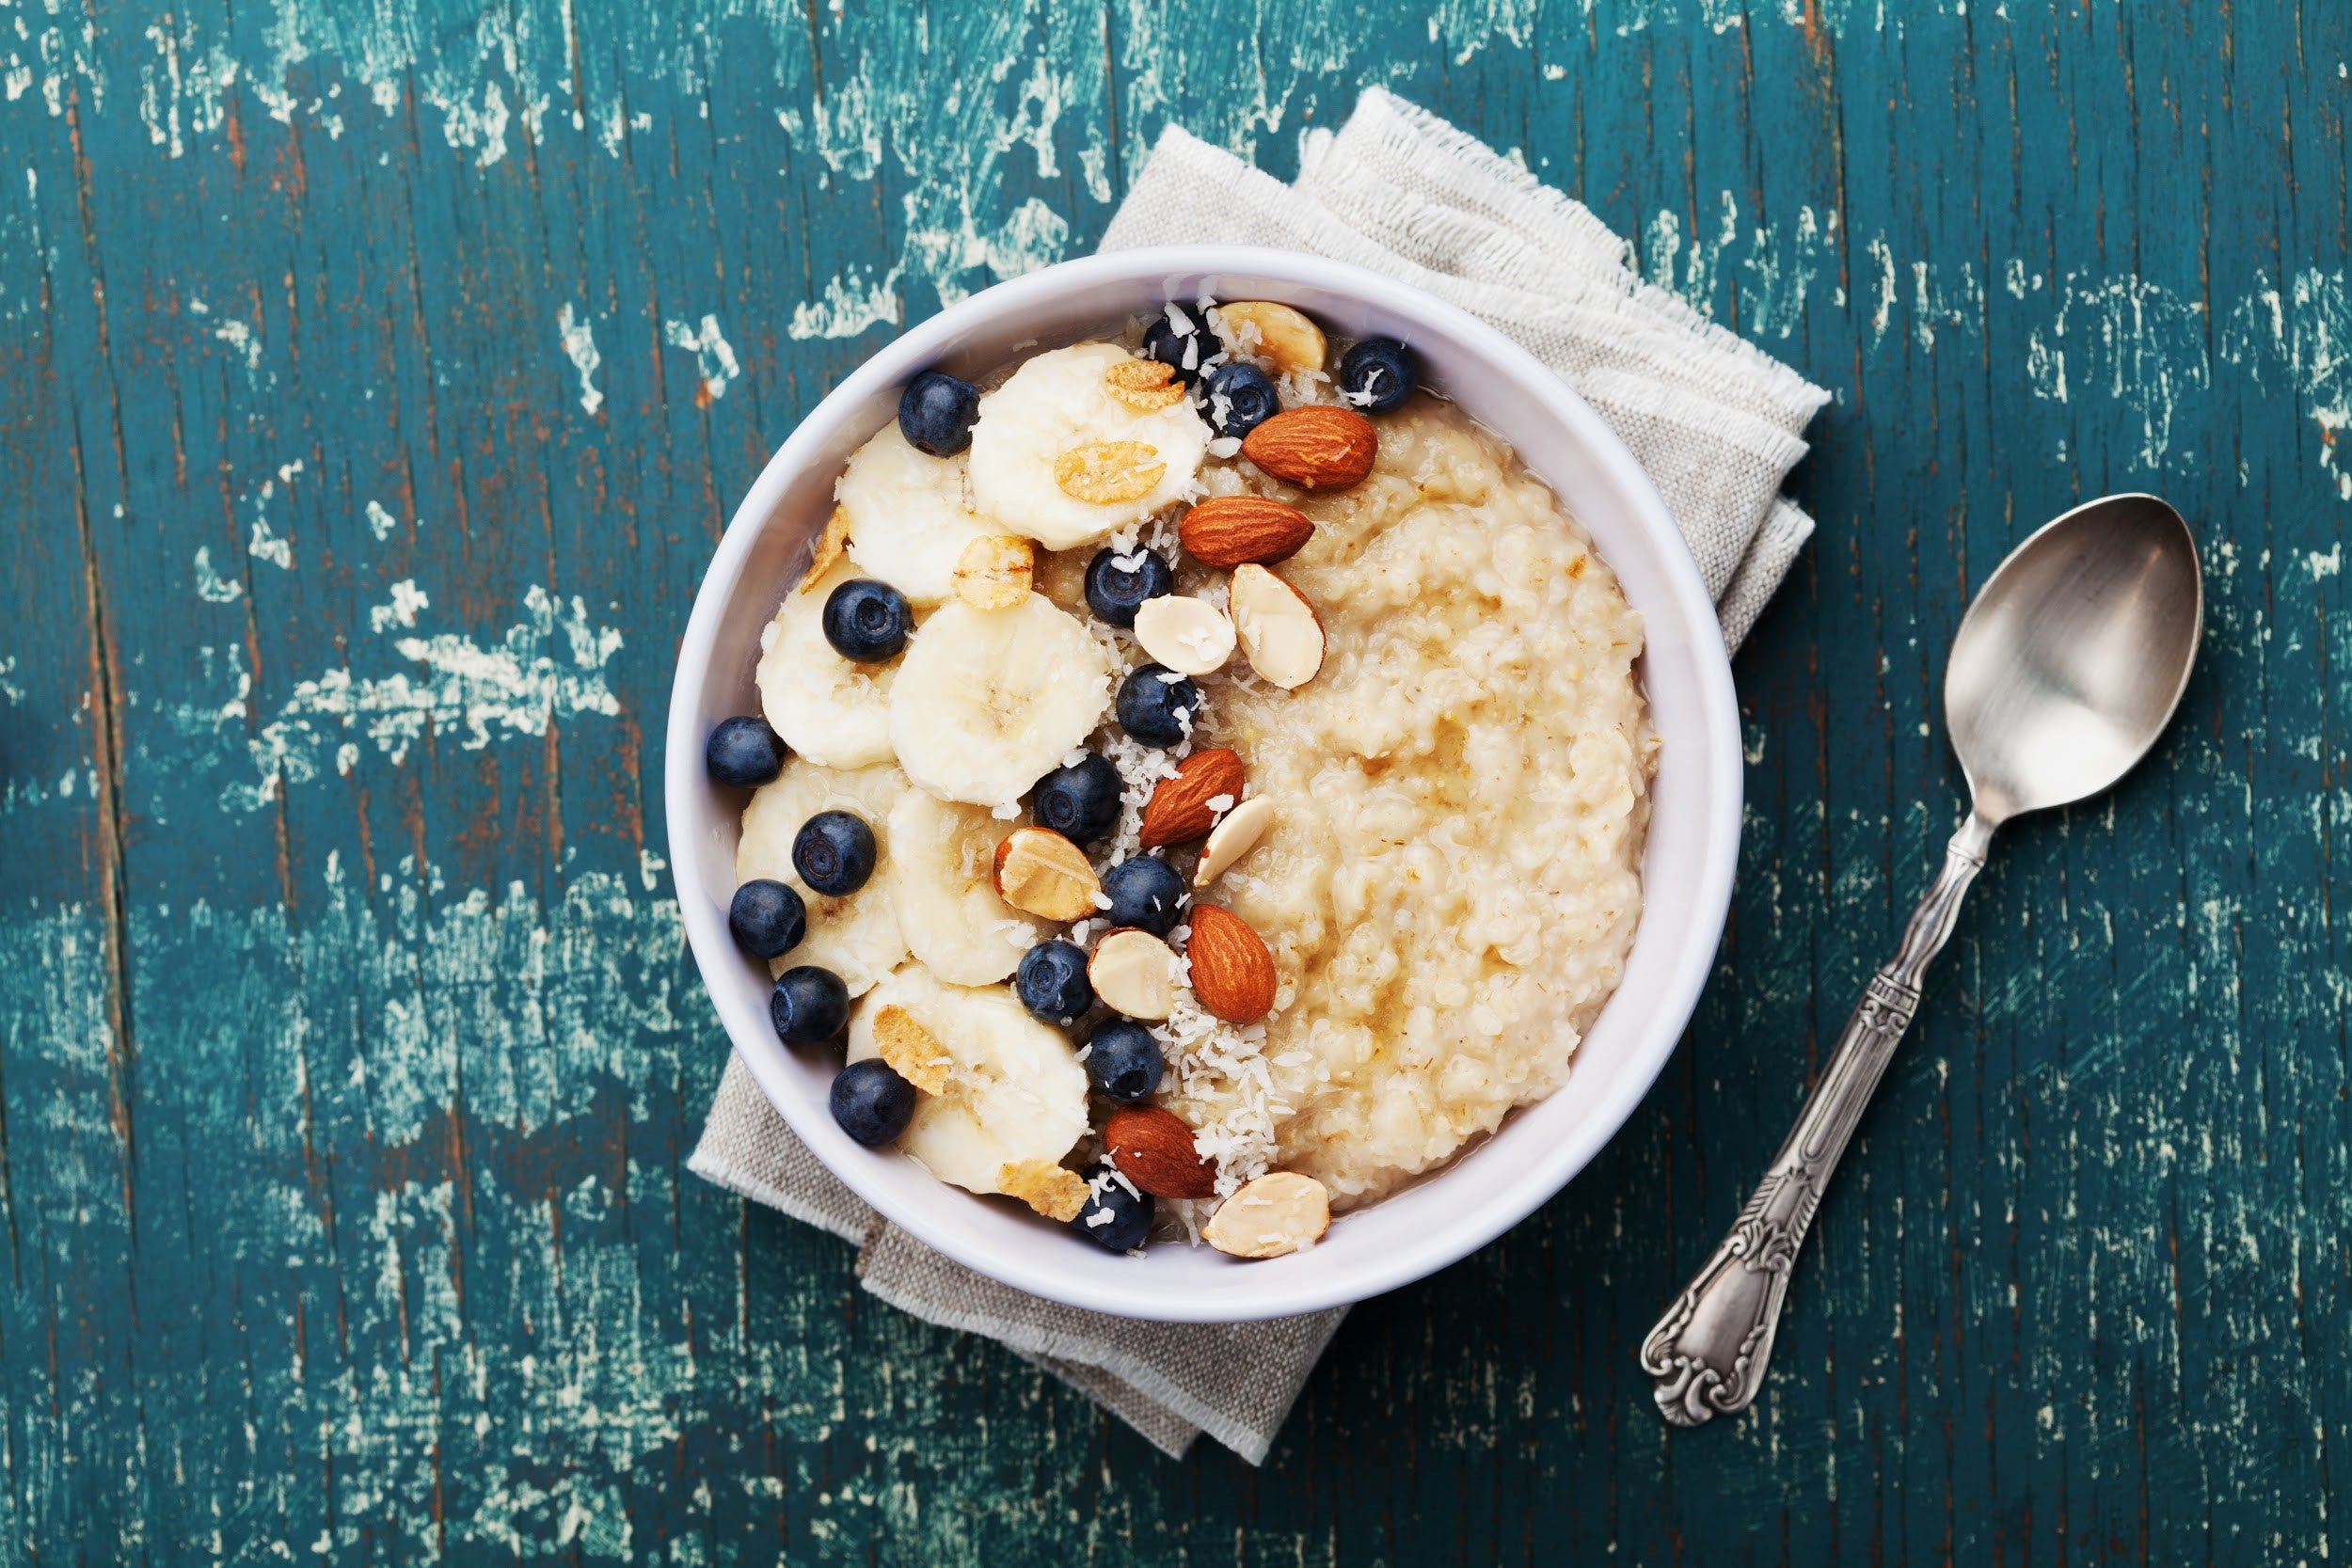 top breakfast recipes for kids with attention deficit disorders - oatmeal with nuts and seeds